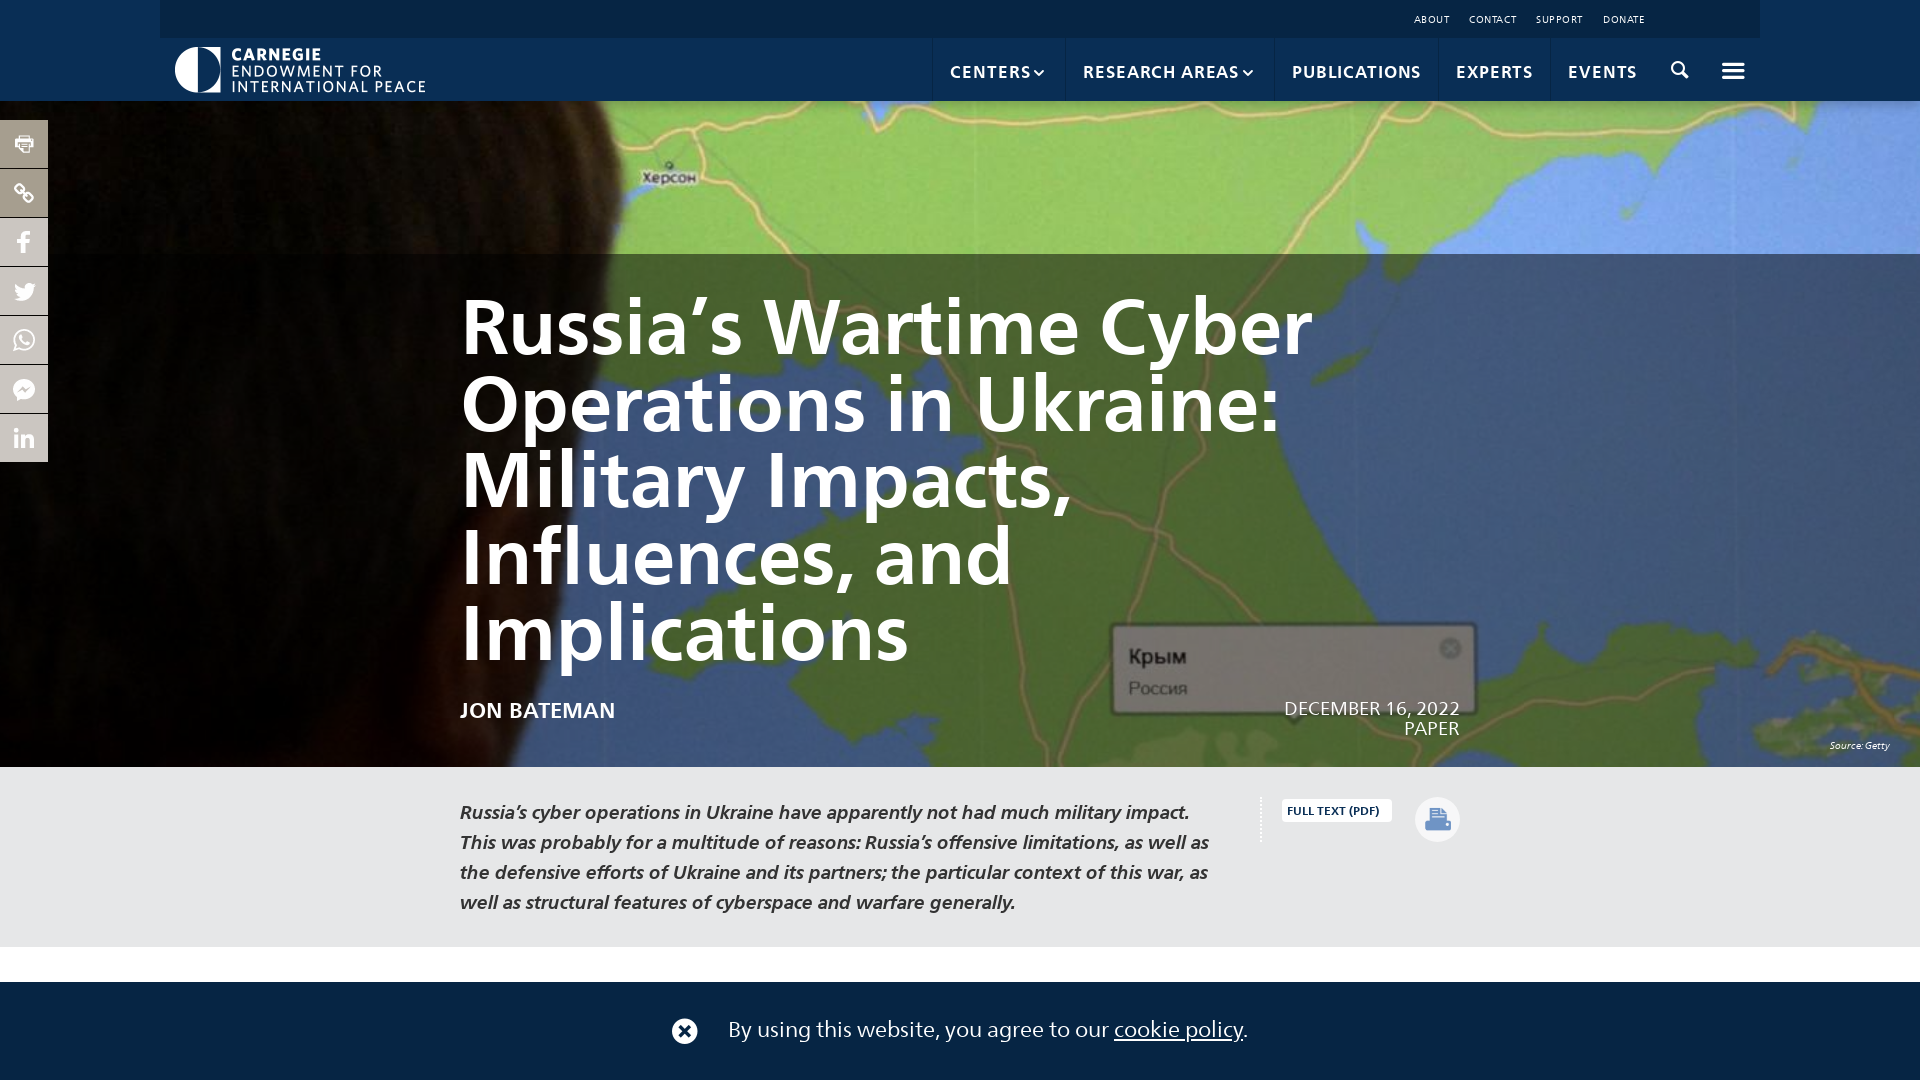 Russia’s Wartime Cyber Operations in Ukraine: Military Impacts, Influences, and Implications - Carnegie Endowment for International Peace